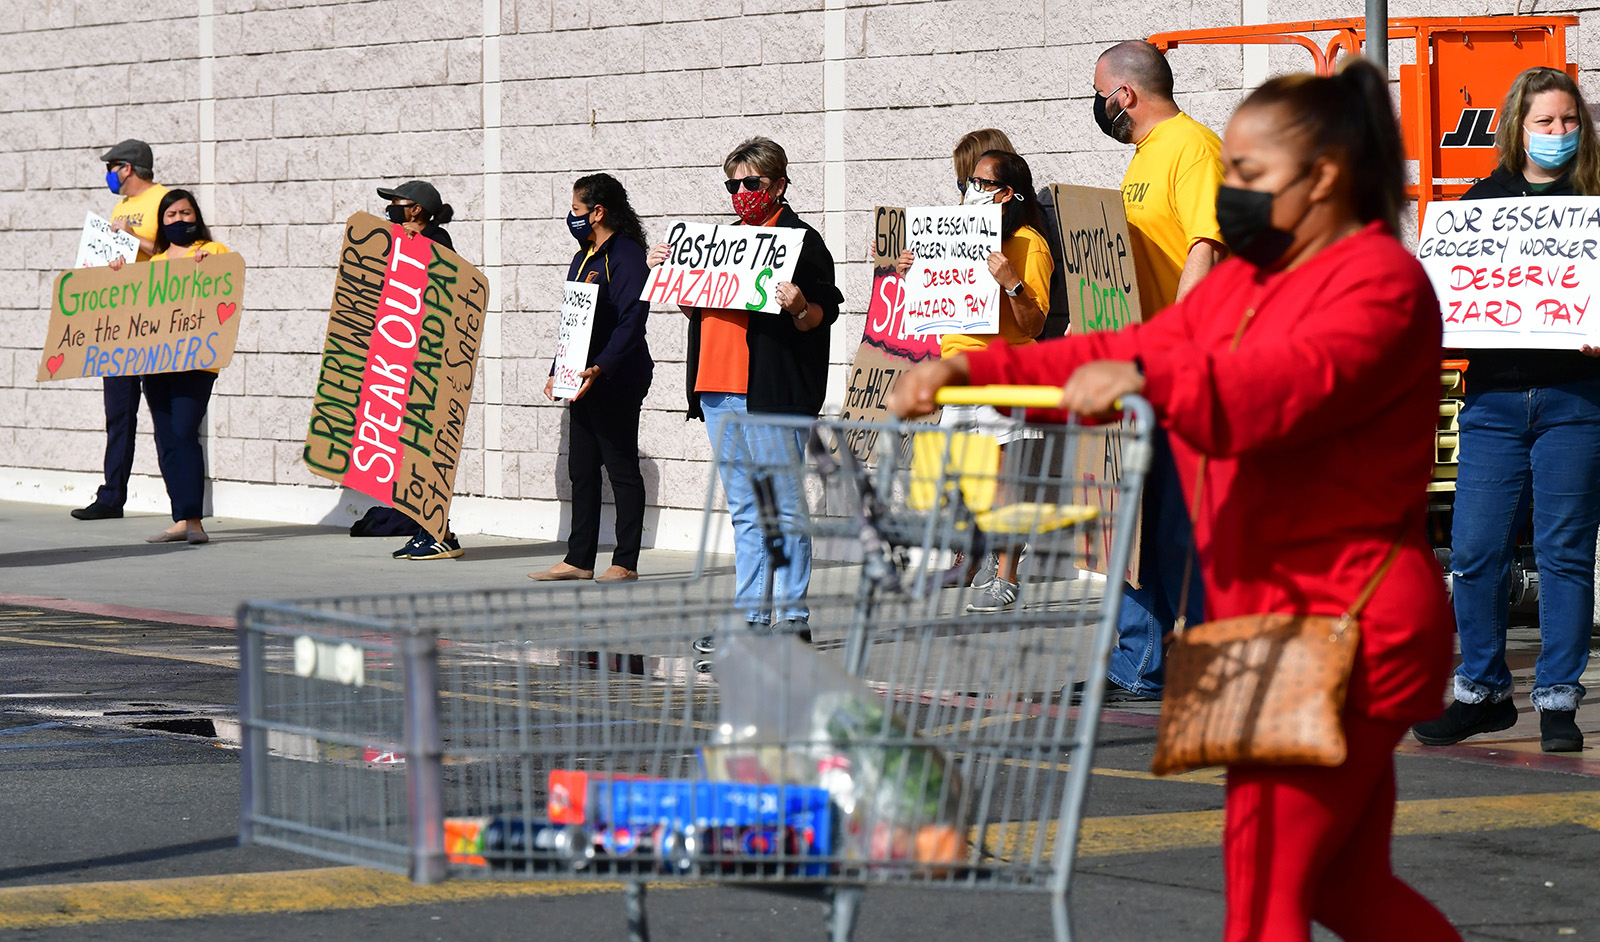 Workers hold placards in protest at a Food 4 Less supermarket in Long Beach, California on February 3, after a decision by owner Kroger to close two stores rather than pay workers an additional $4 in "hazard pay" for their continued work during the pandemic.